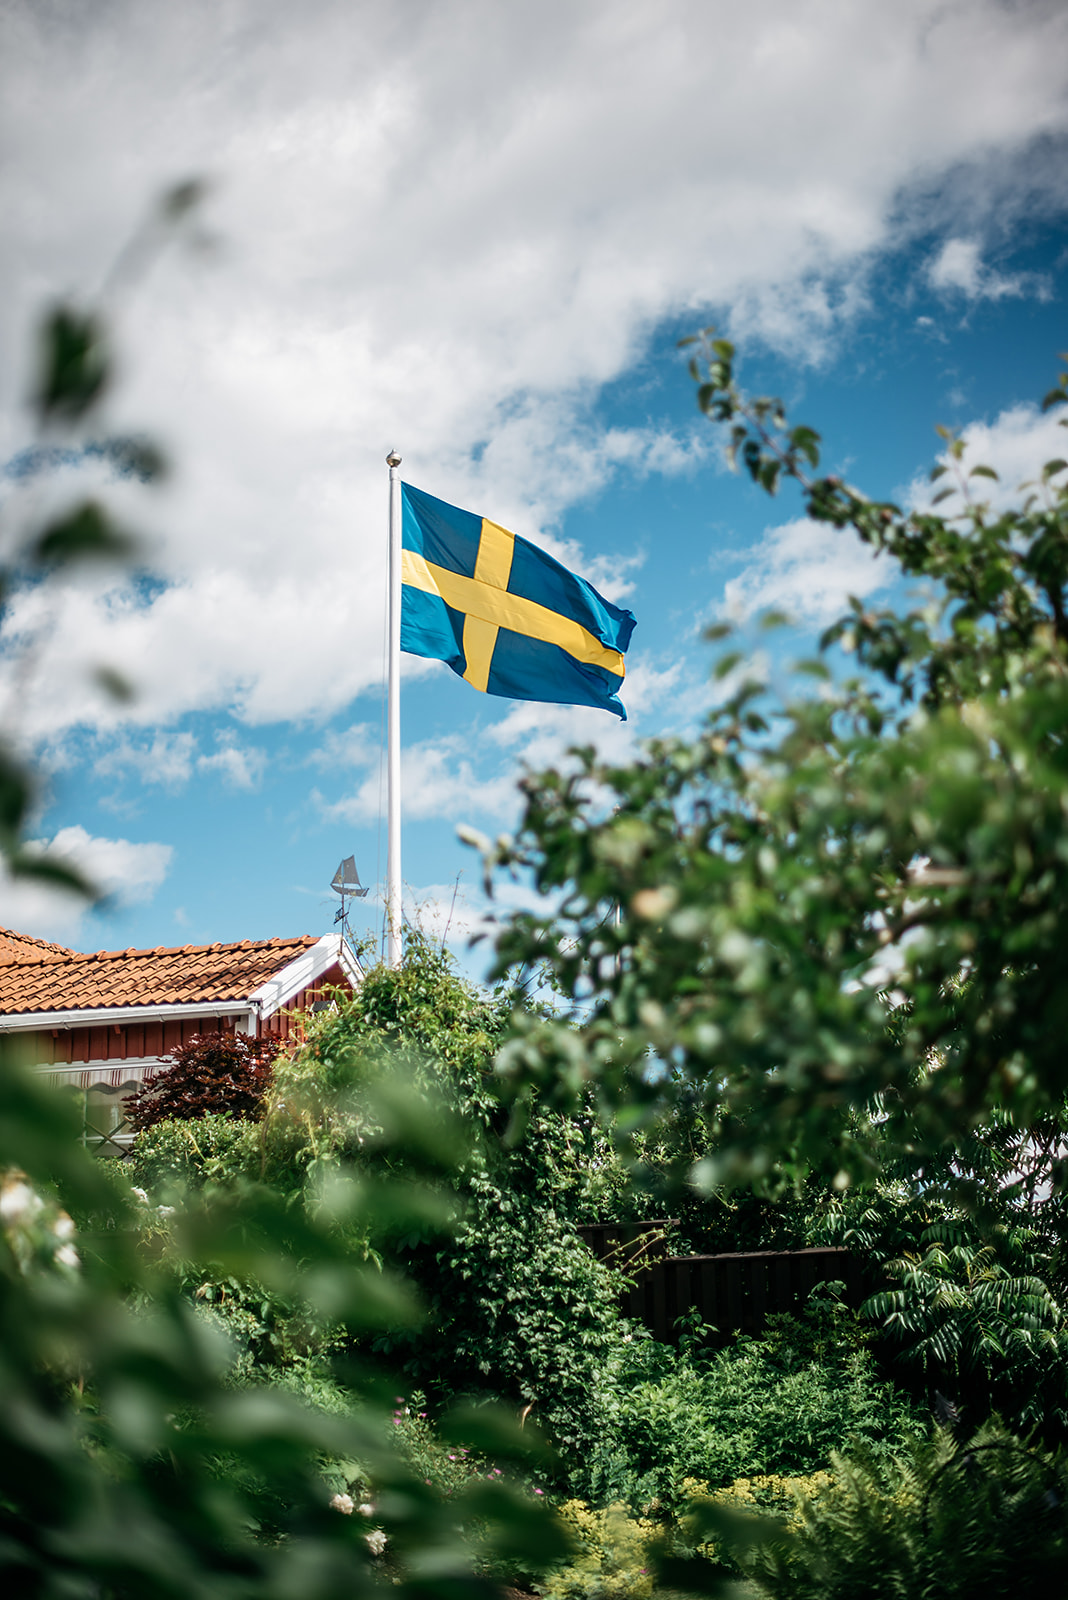 Swedish flag in the wind on a bright day